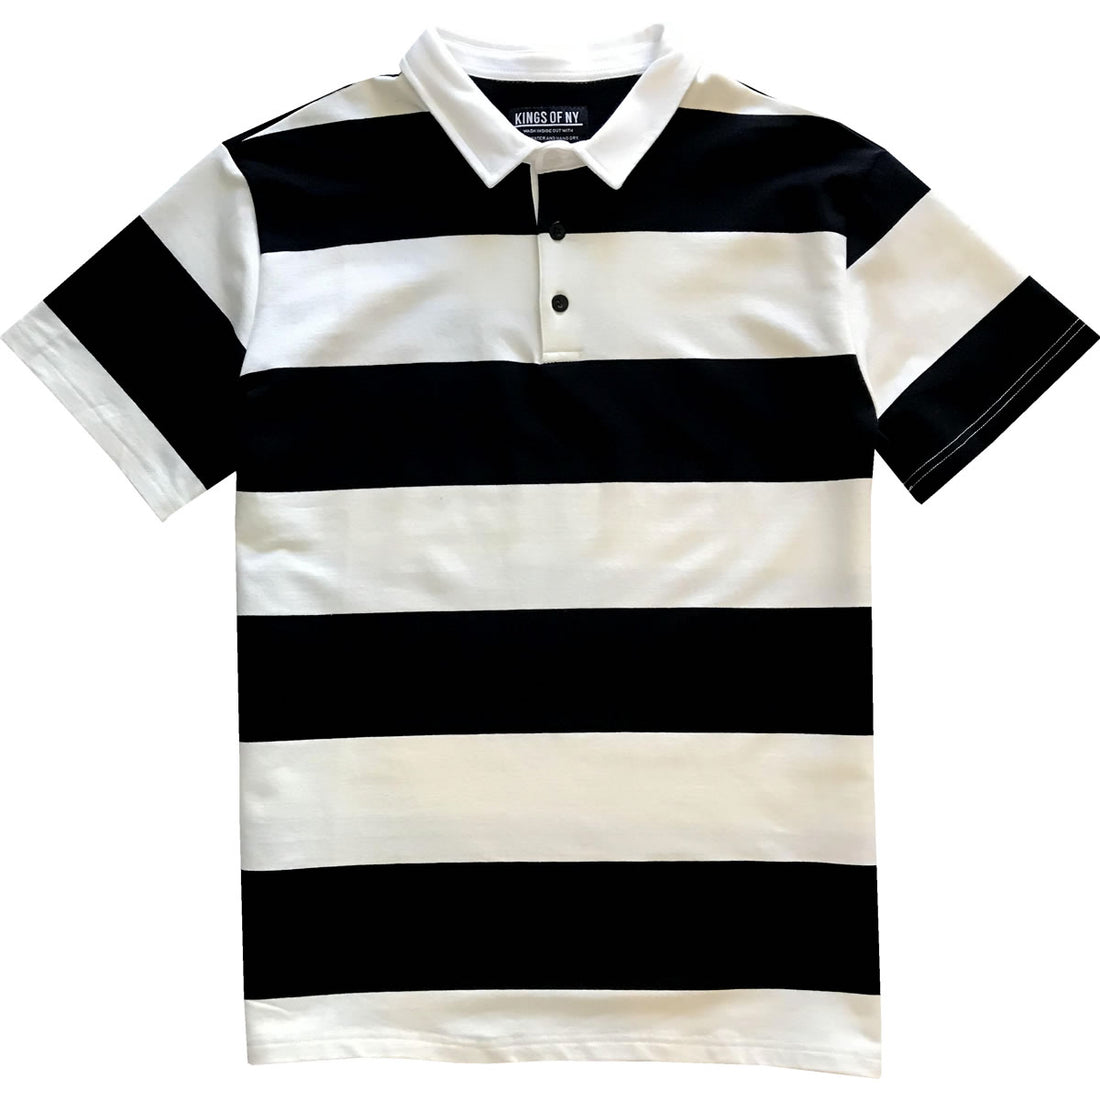 Black and White Short Sleeve Striped Men's Rugby Shirt